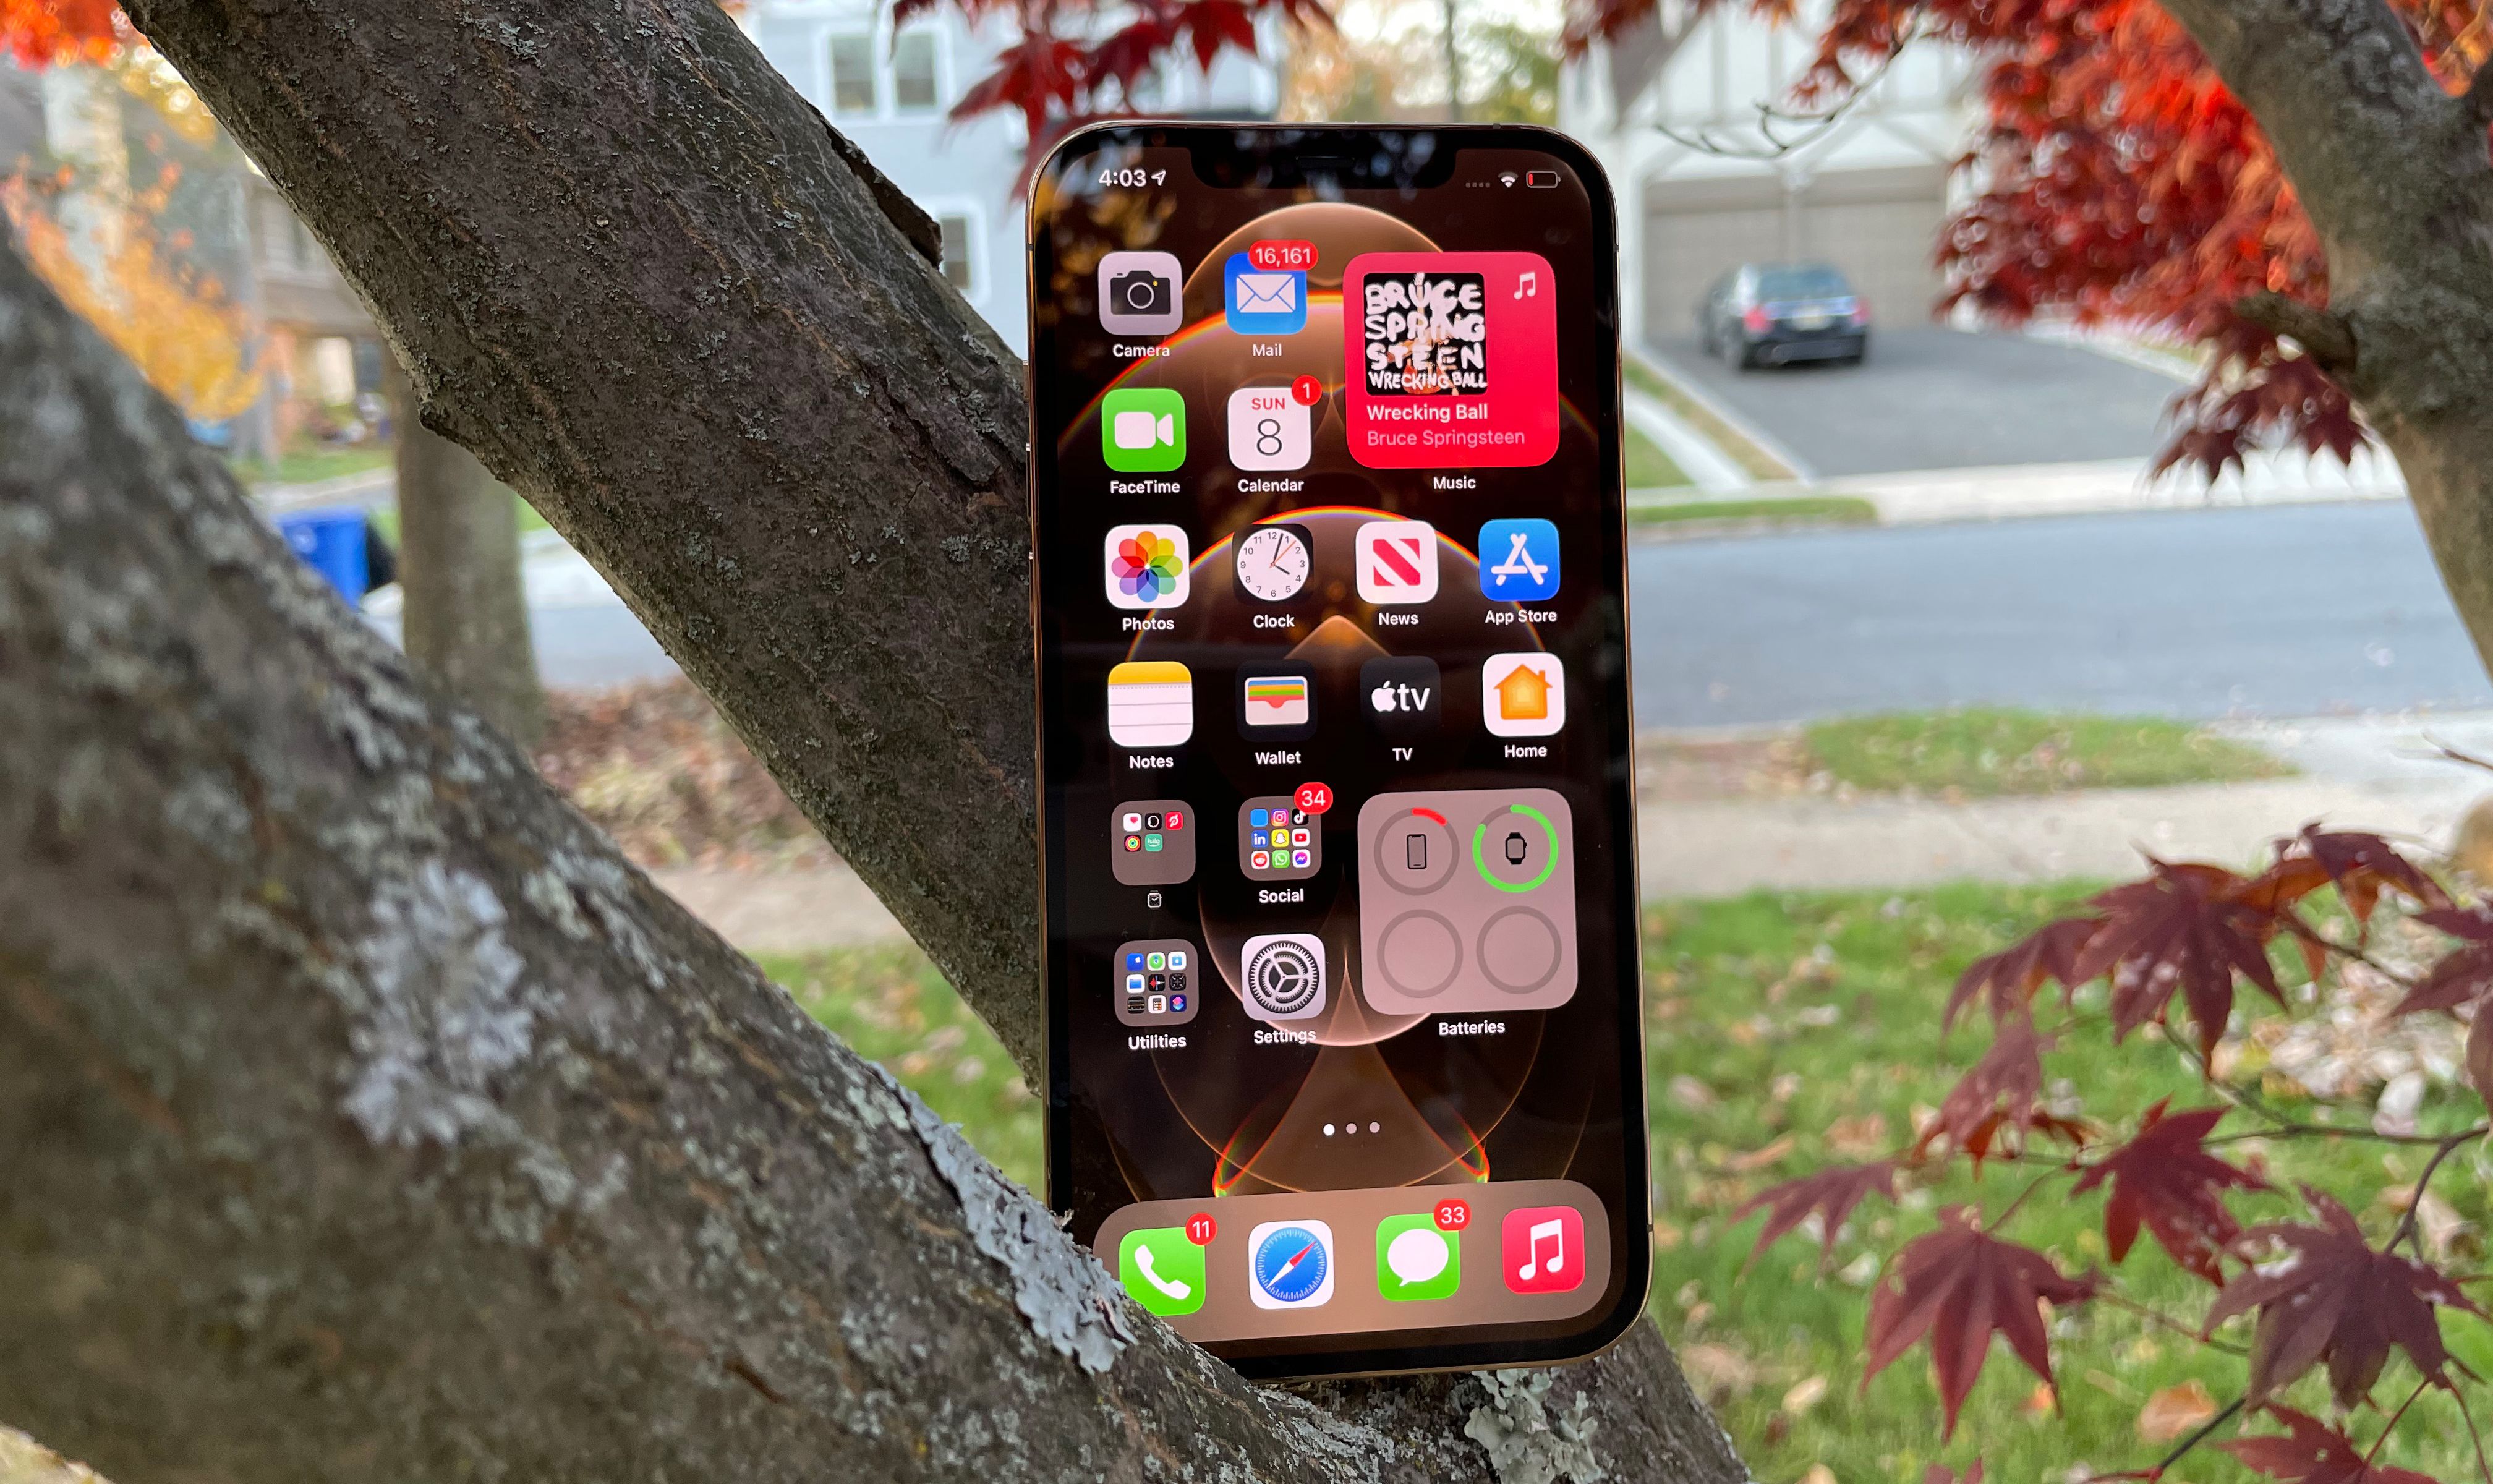 Review: iPhone 12 Pro Max takes the iPhone to yet another level